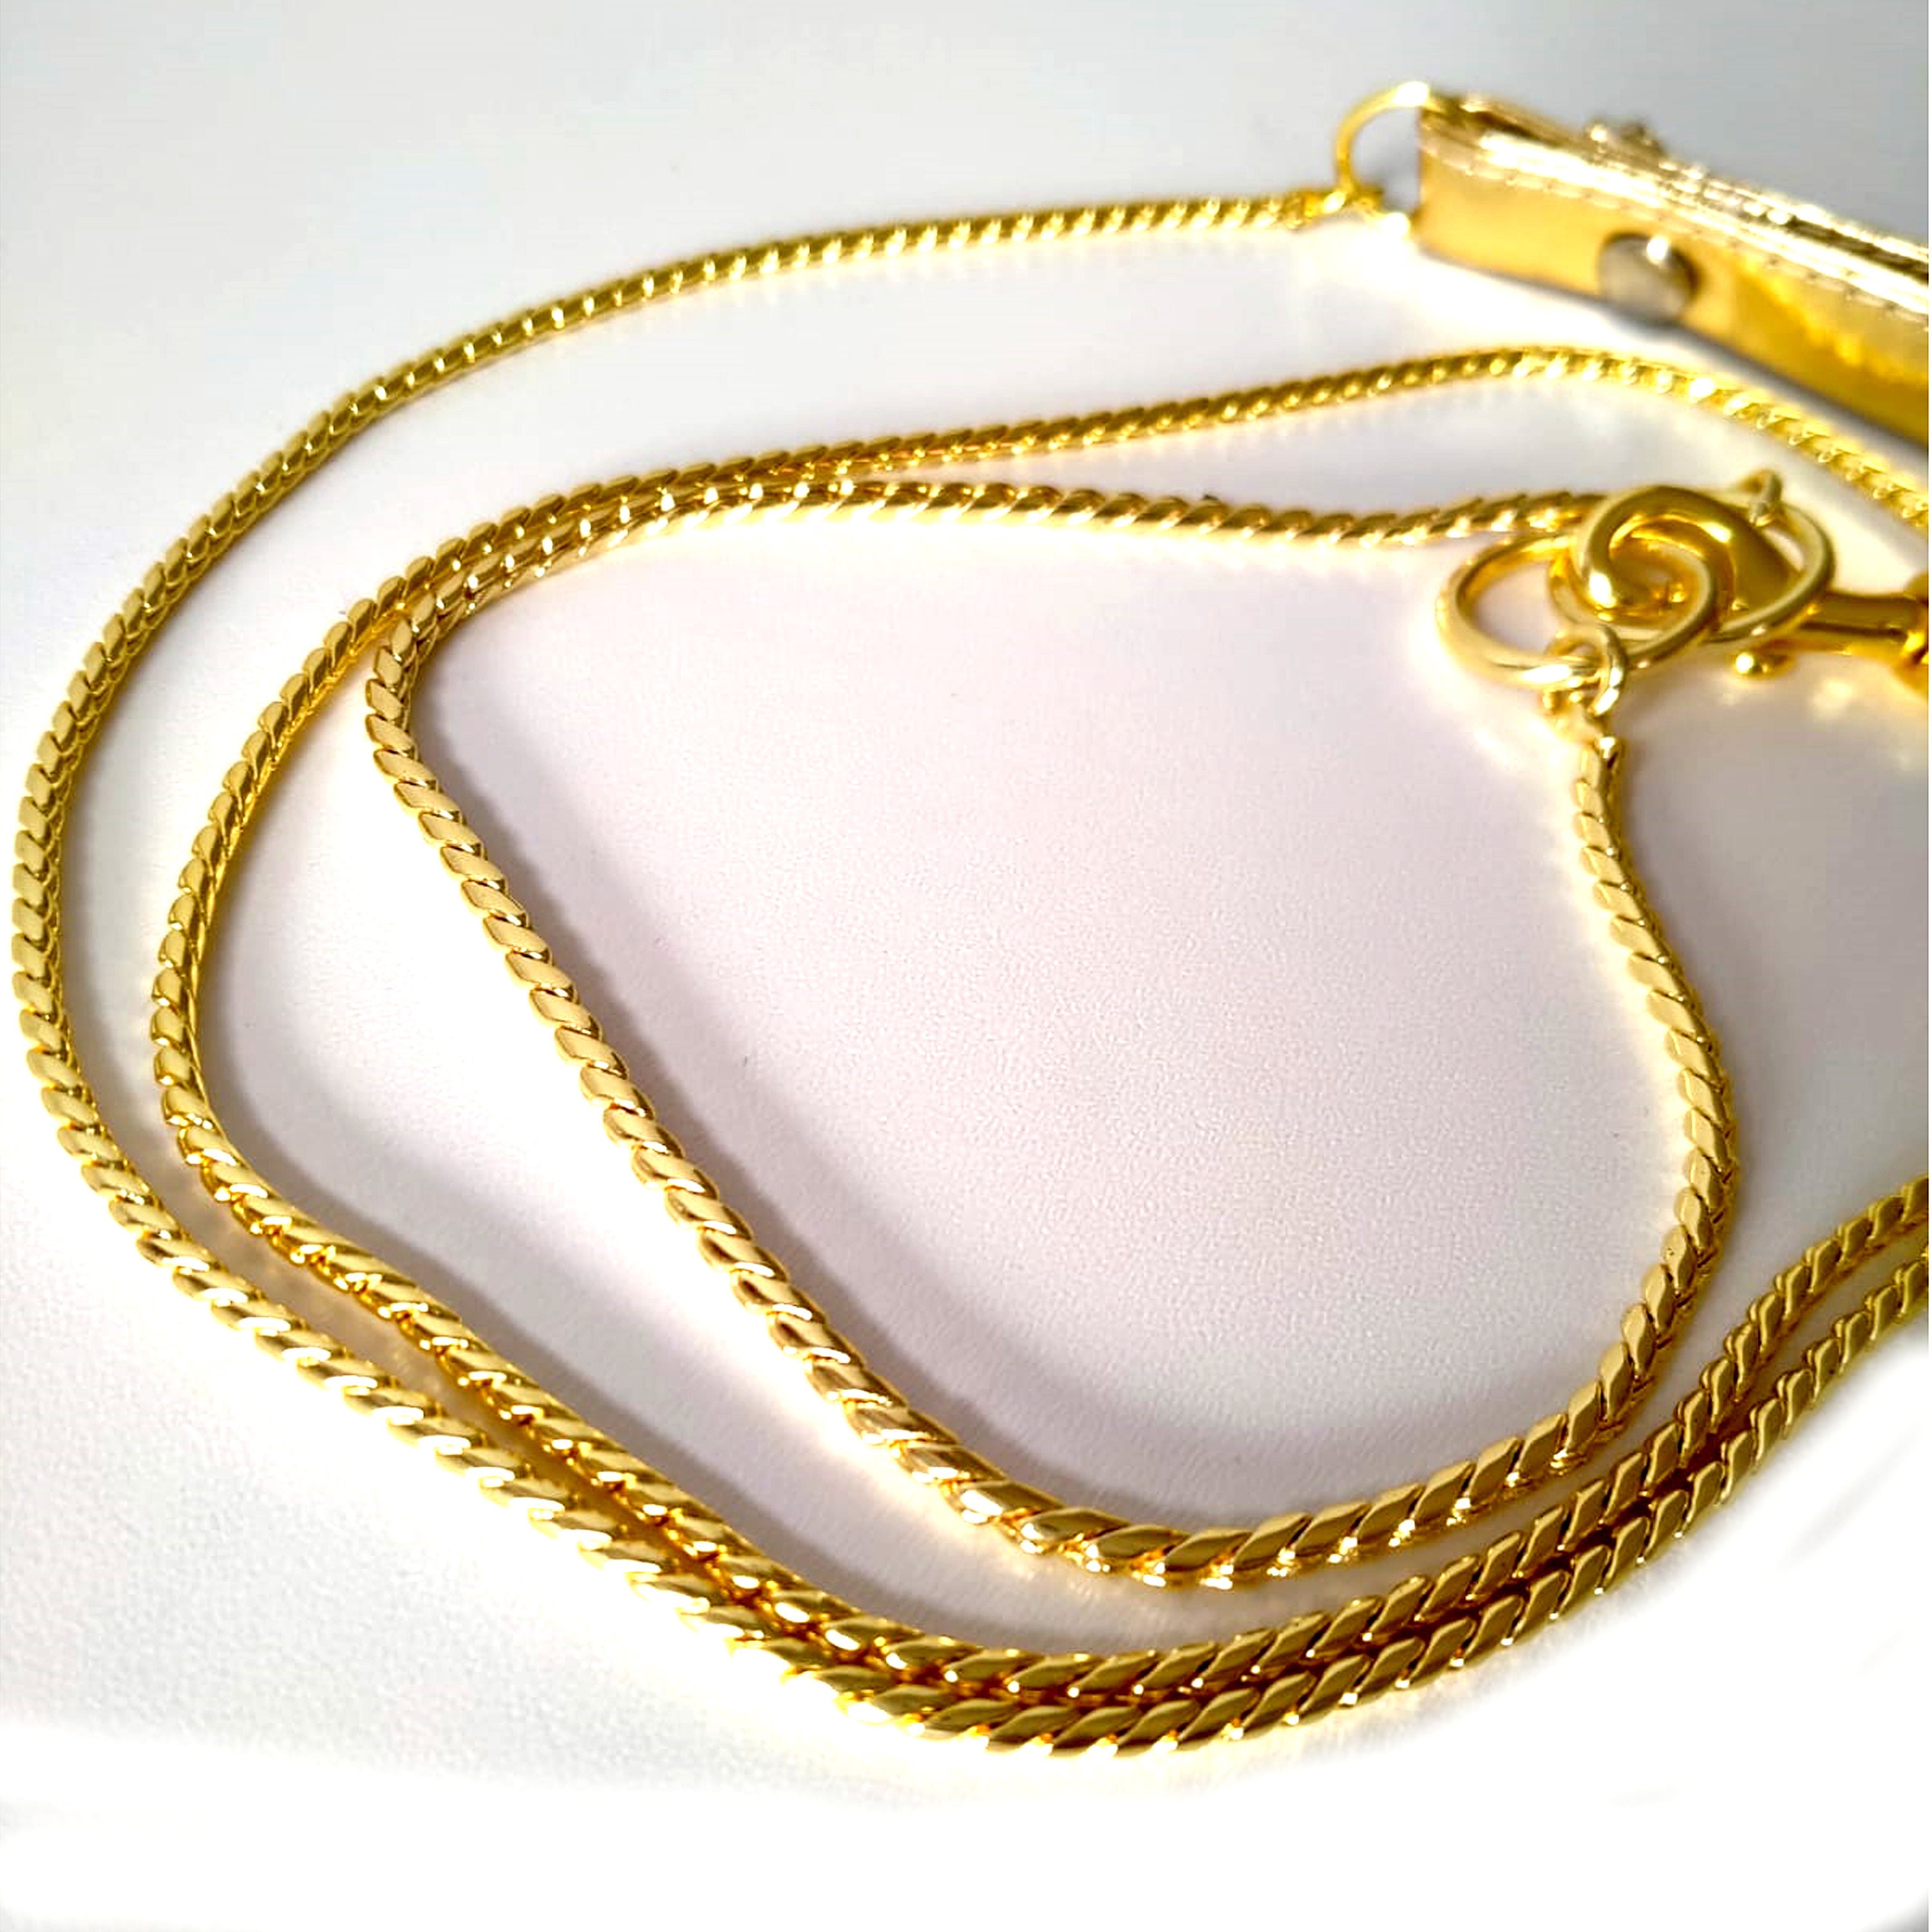 Dog show Gold plated metal Lead Leash with Authentic Leather Handle for Choker 